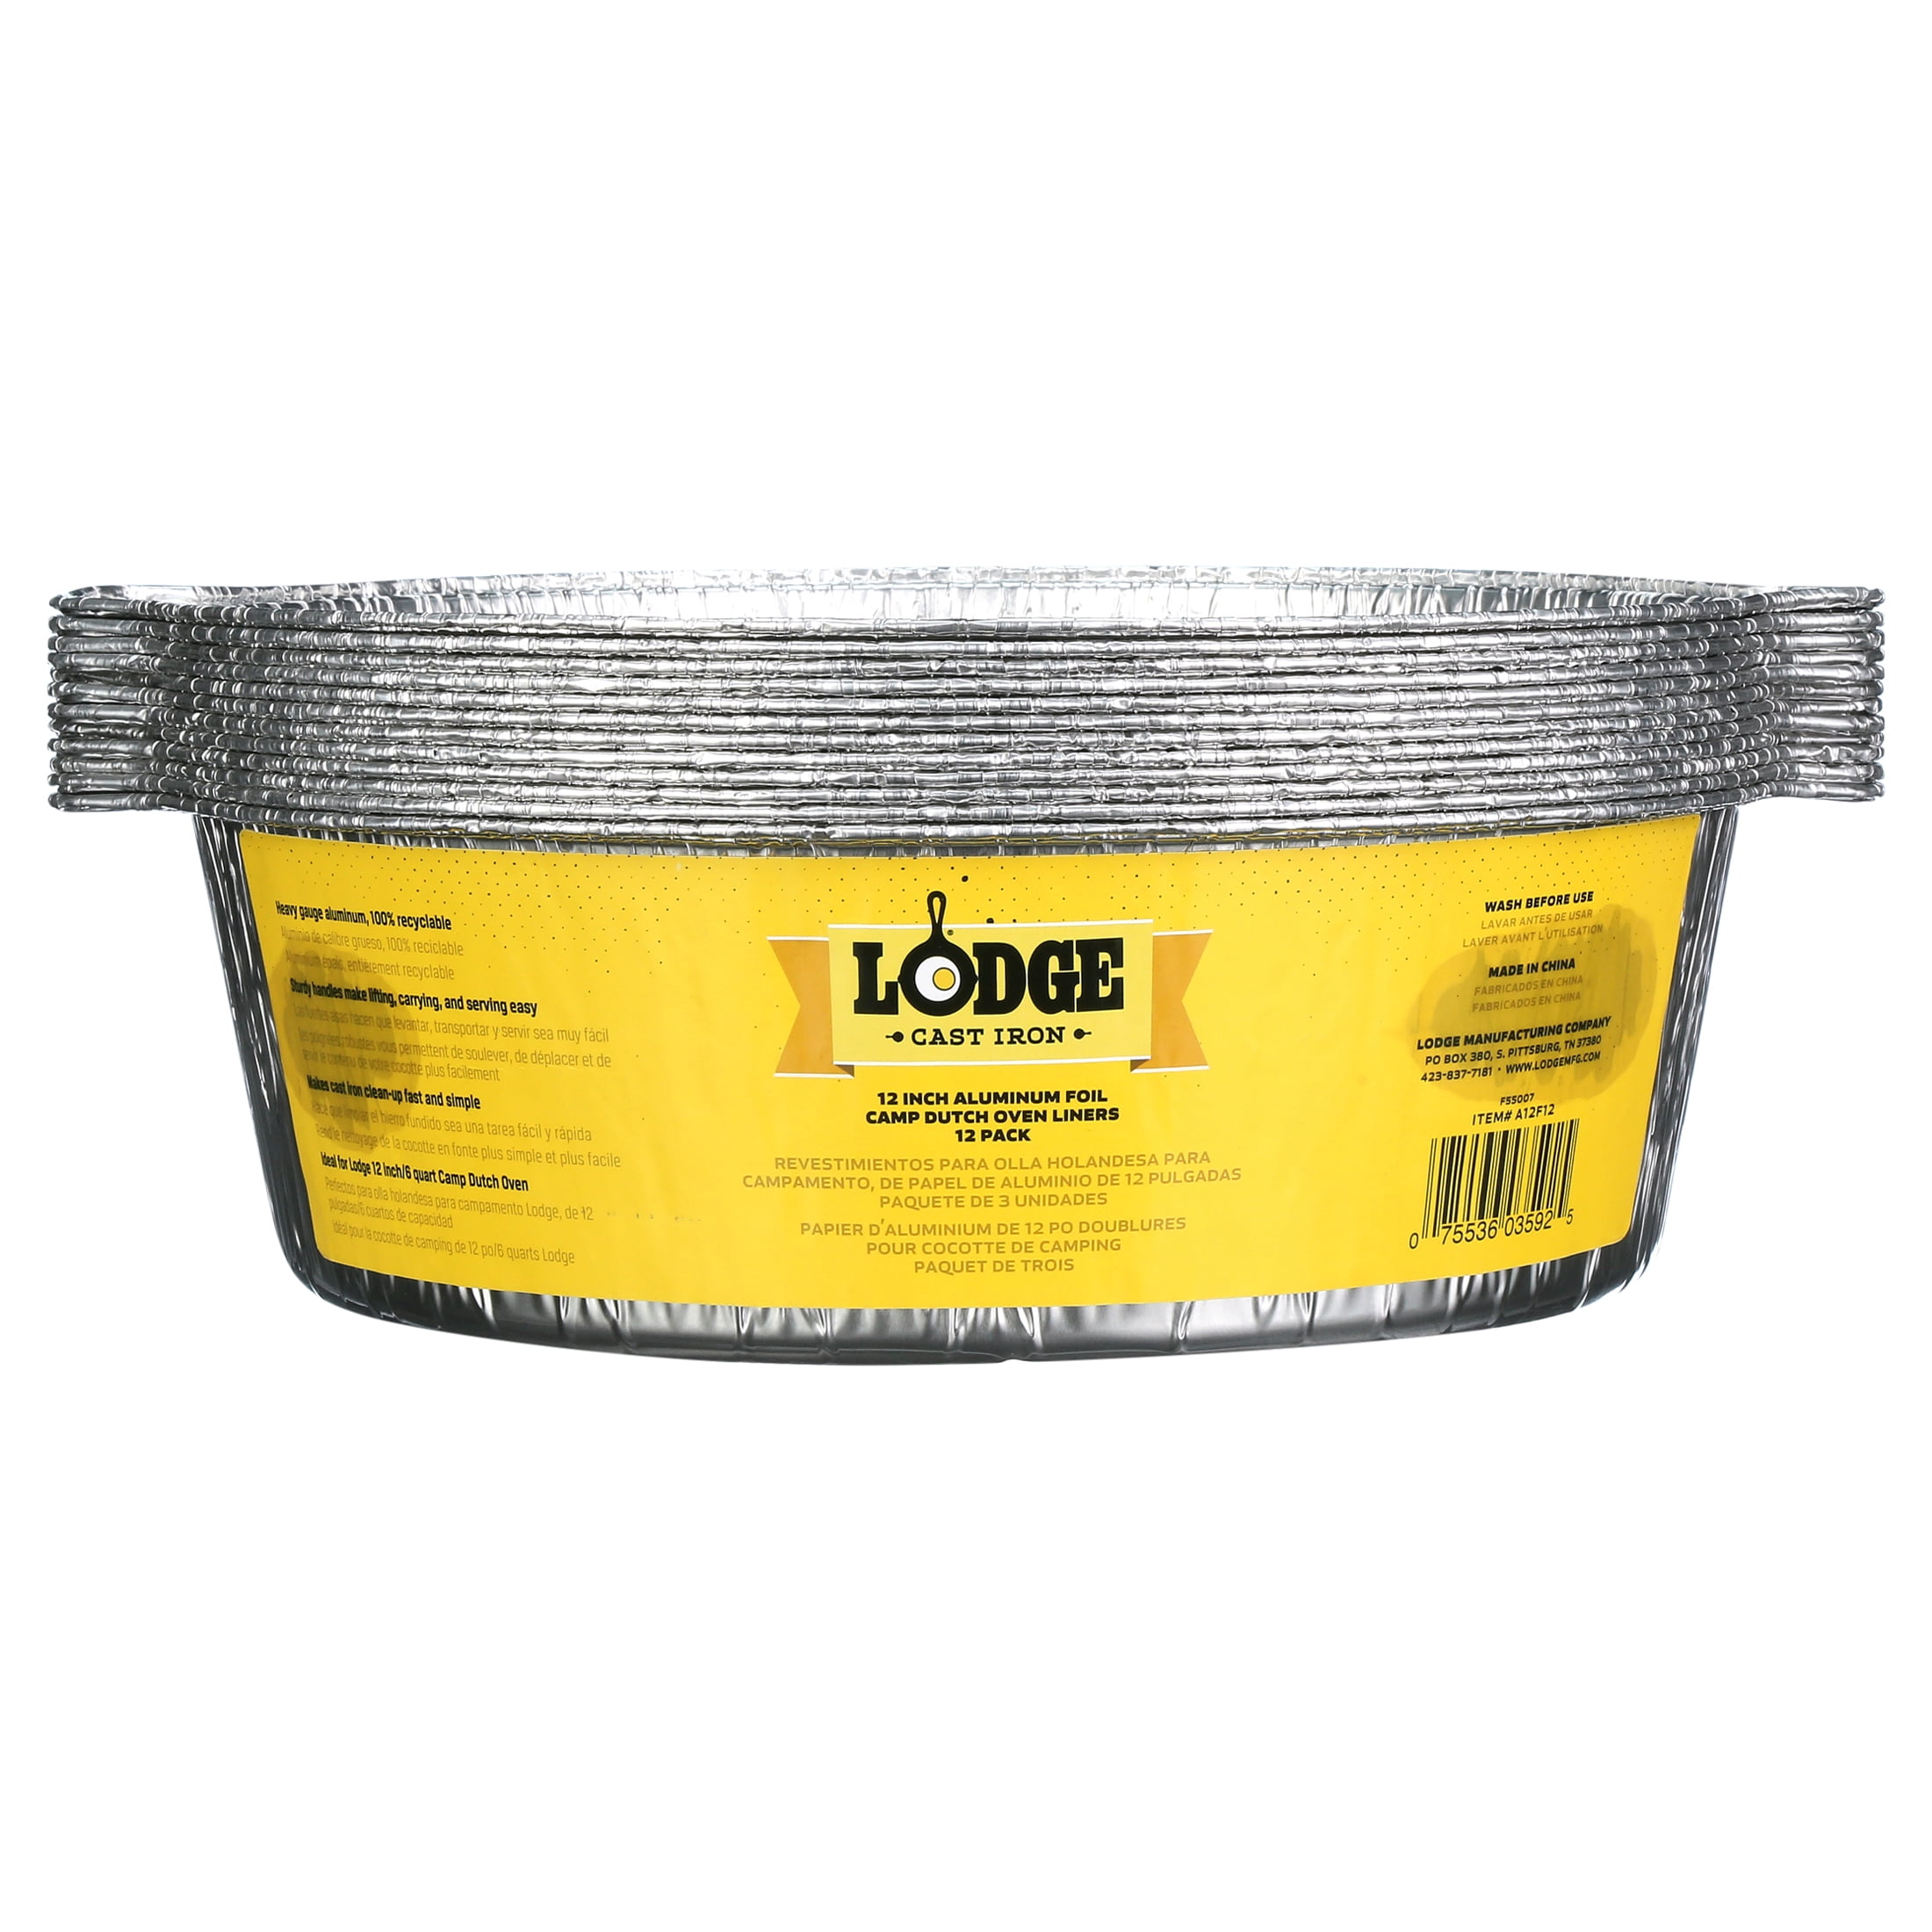 CAMP LINER Campliner Dutch Oven Liners, 30 Pack of 12â€ 6 Quart Disposable  Liners - No More Cleaning or Seasoning. Fits Lodge, Camp